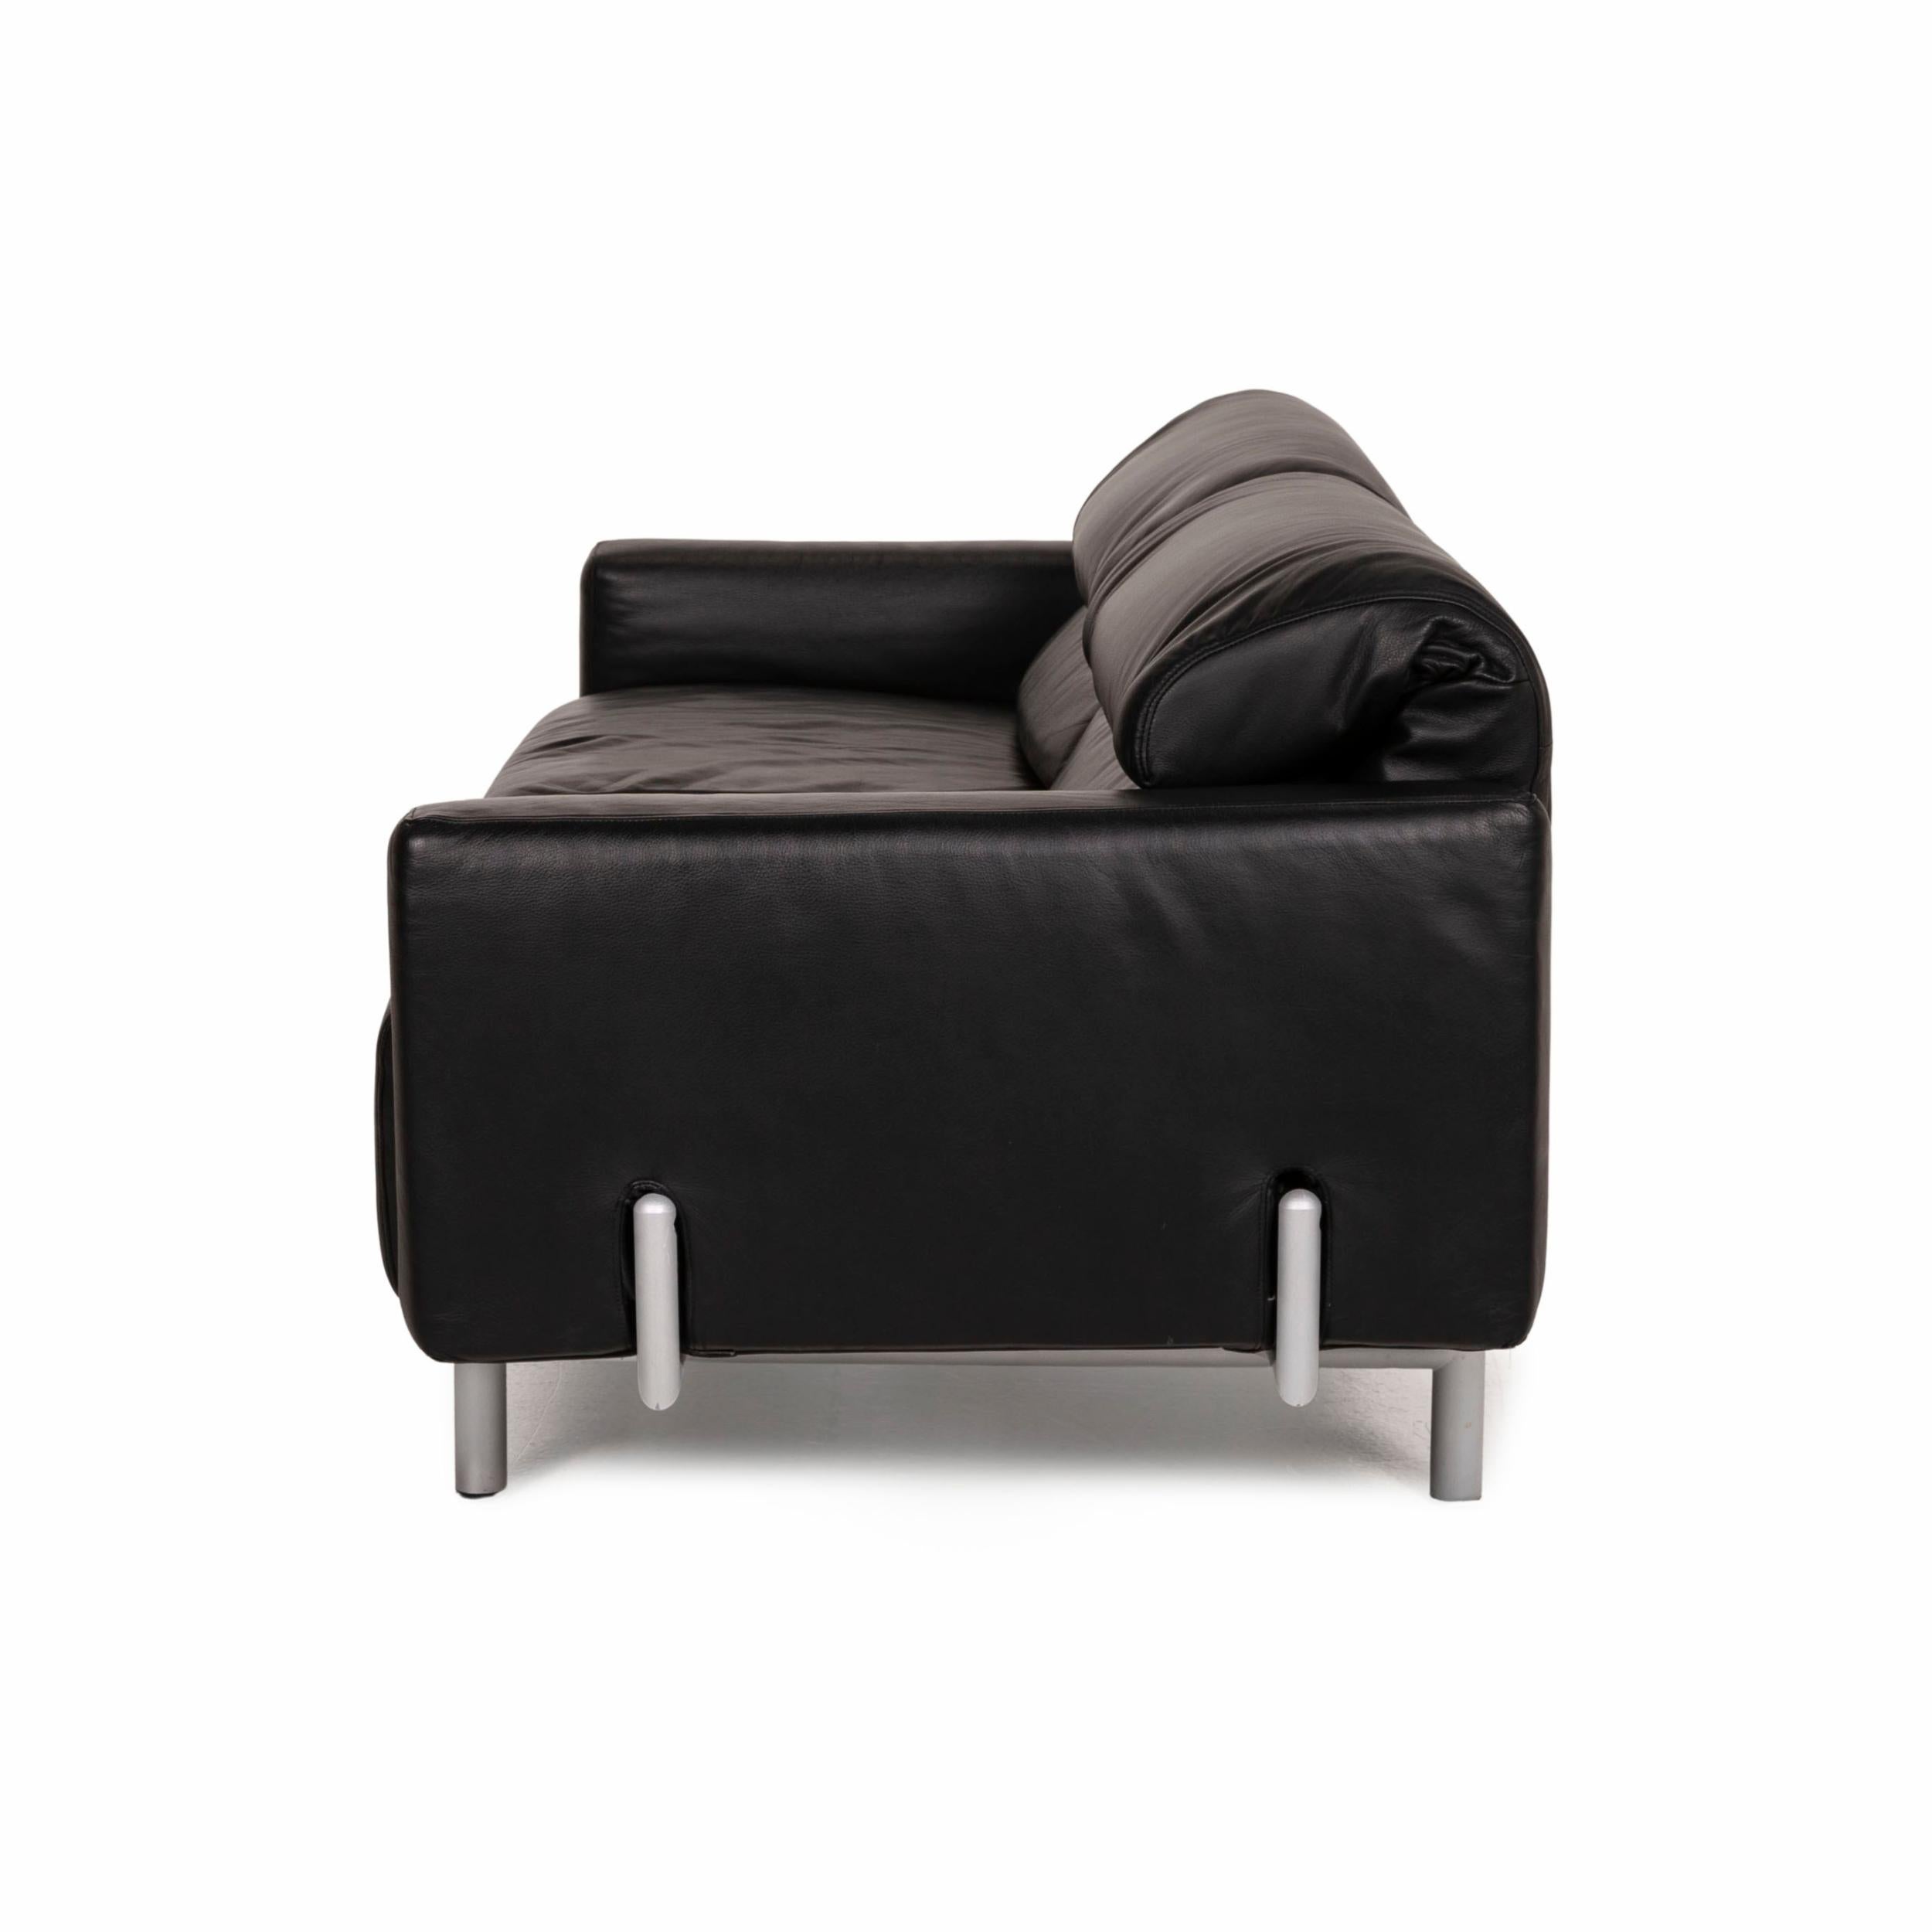 Strässle Matteo Leather Sofa Black Two-Seater Function Relax Function Couch 5